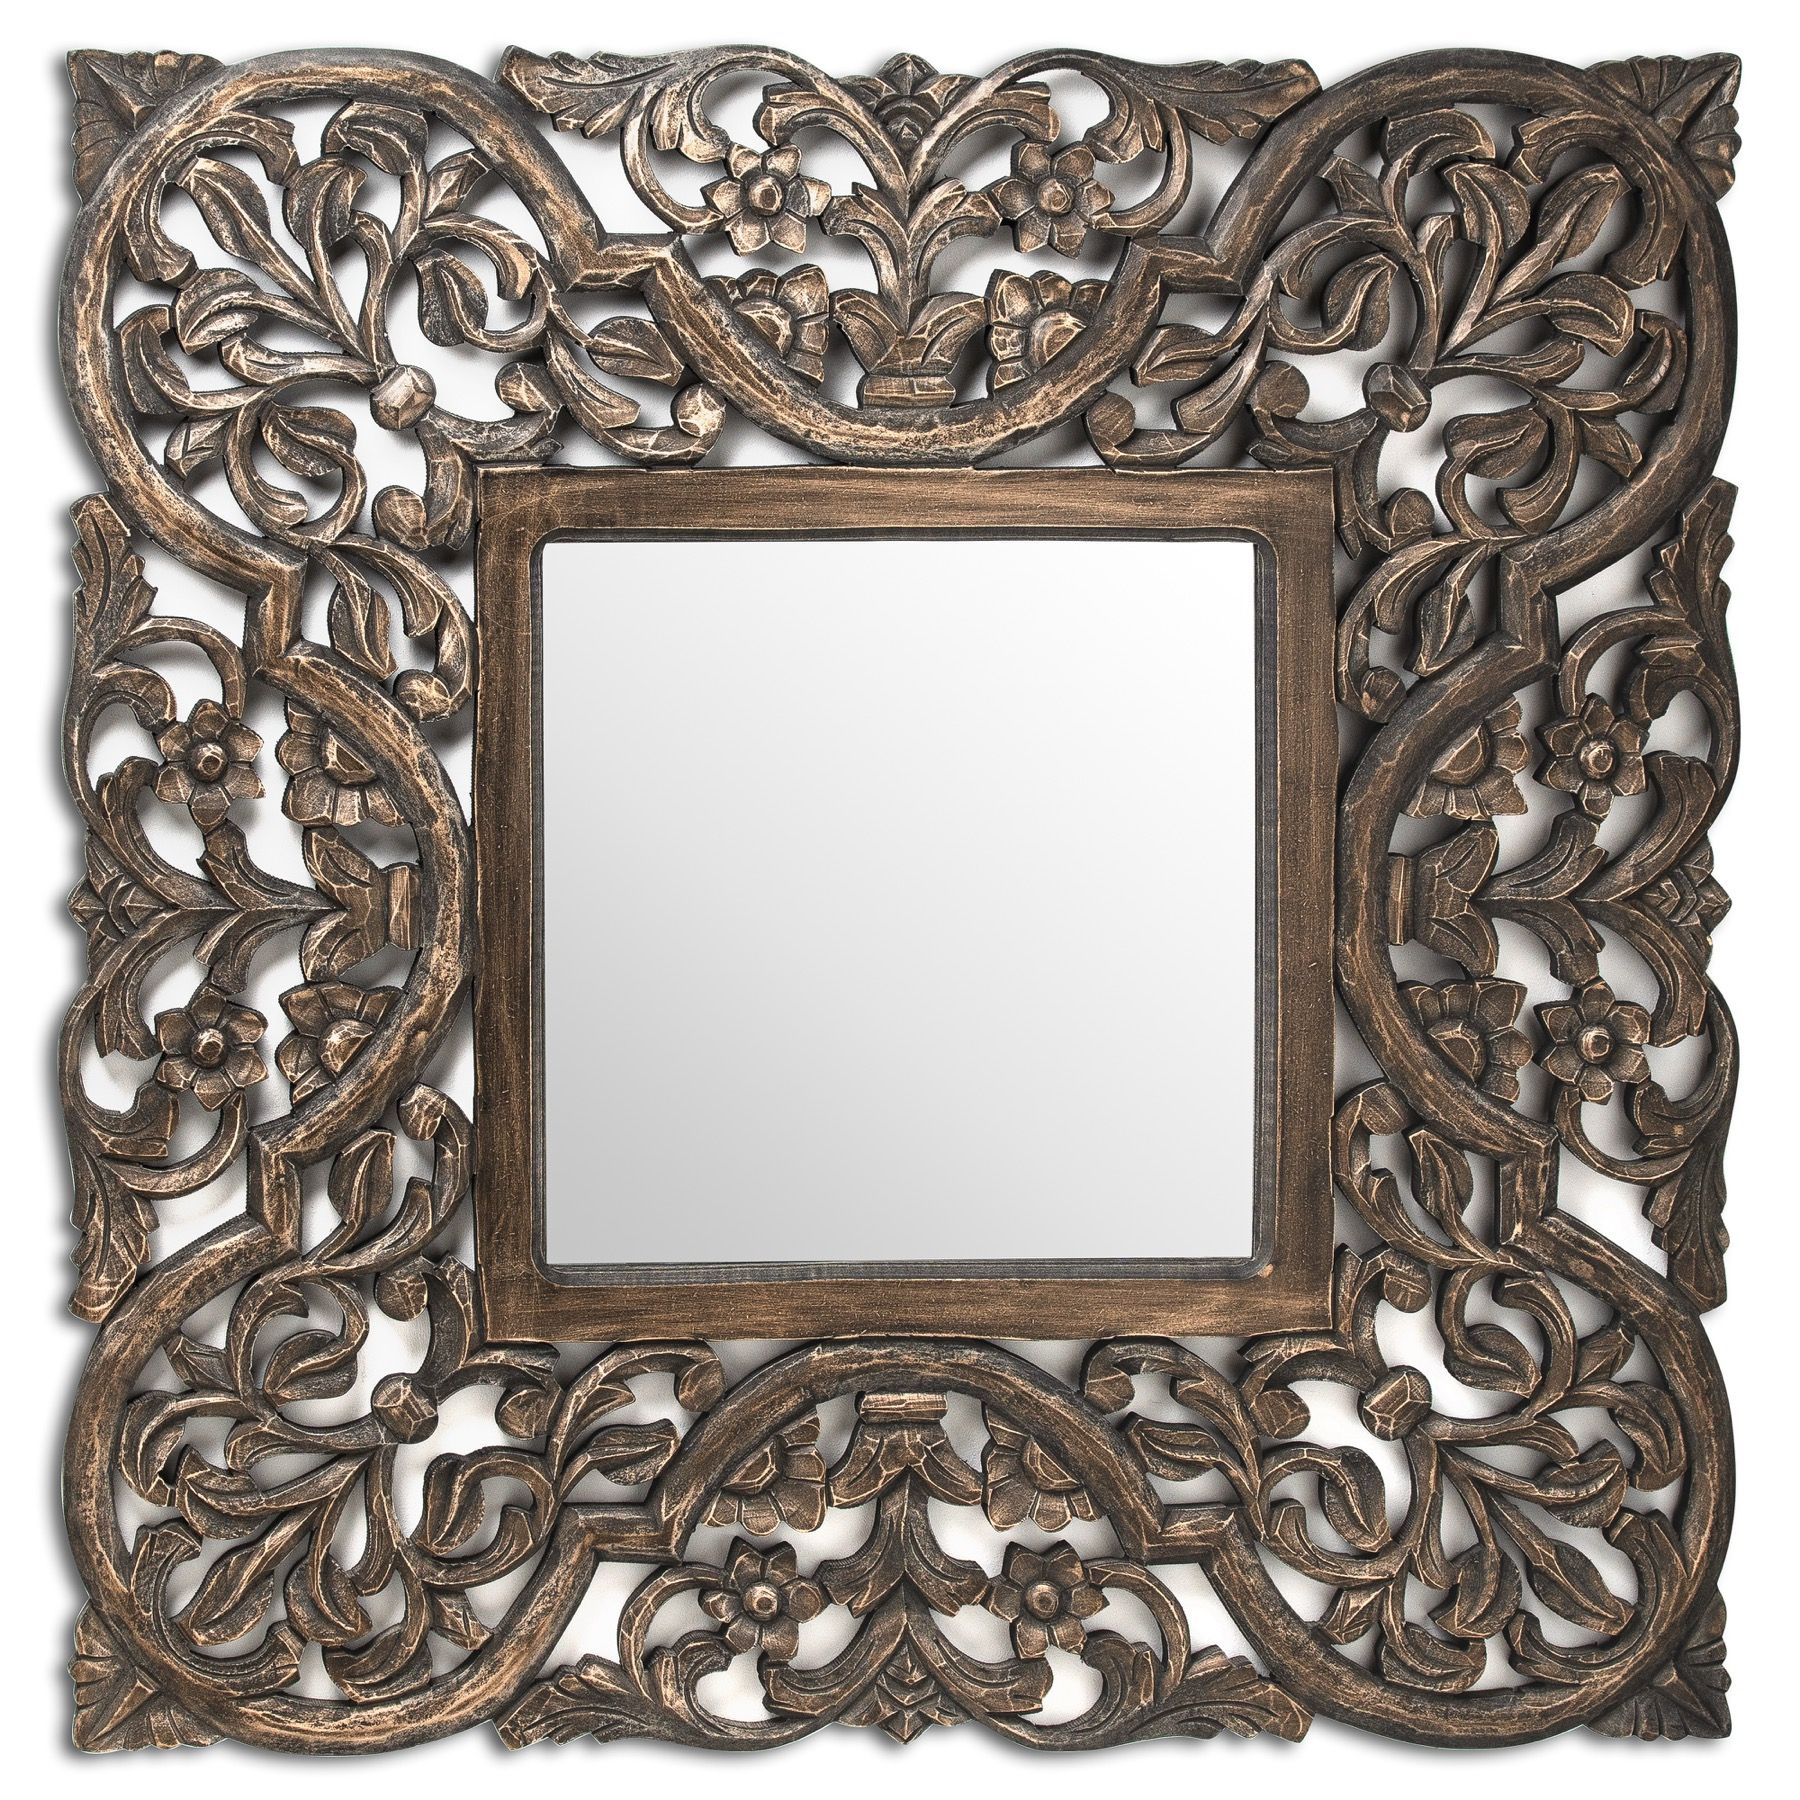 Dakato Grey Wash Carved Mirror | Wholesalehill Interiors Within Gray Washed Wood Wall Mirrors (View 7 of 15)